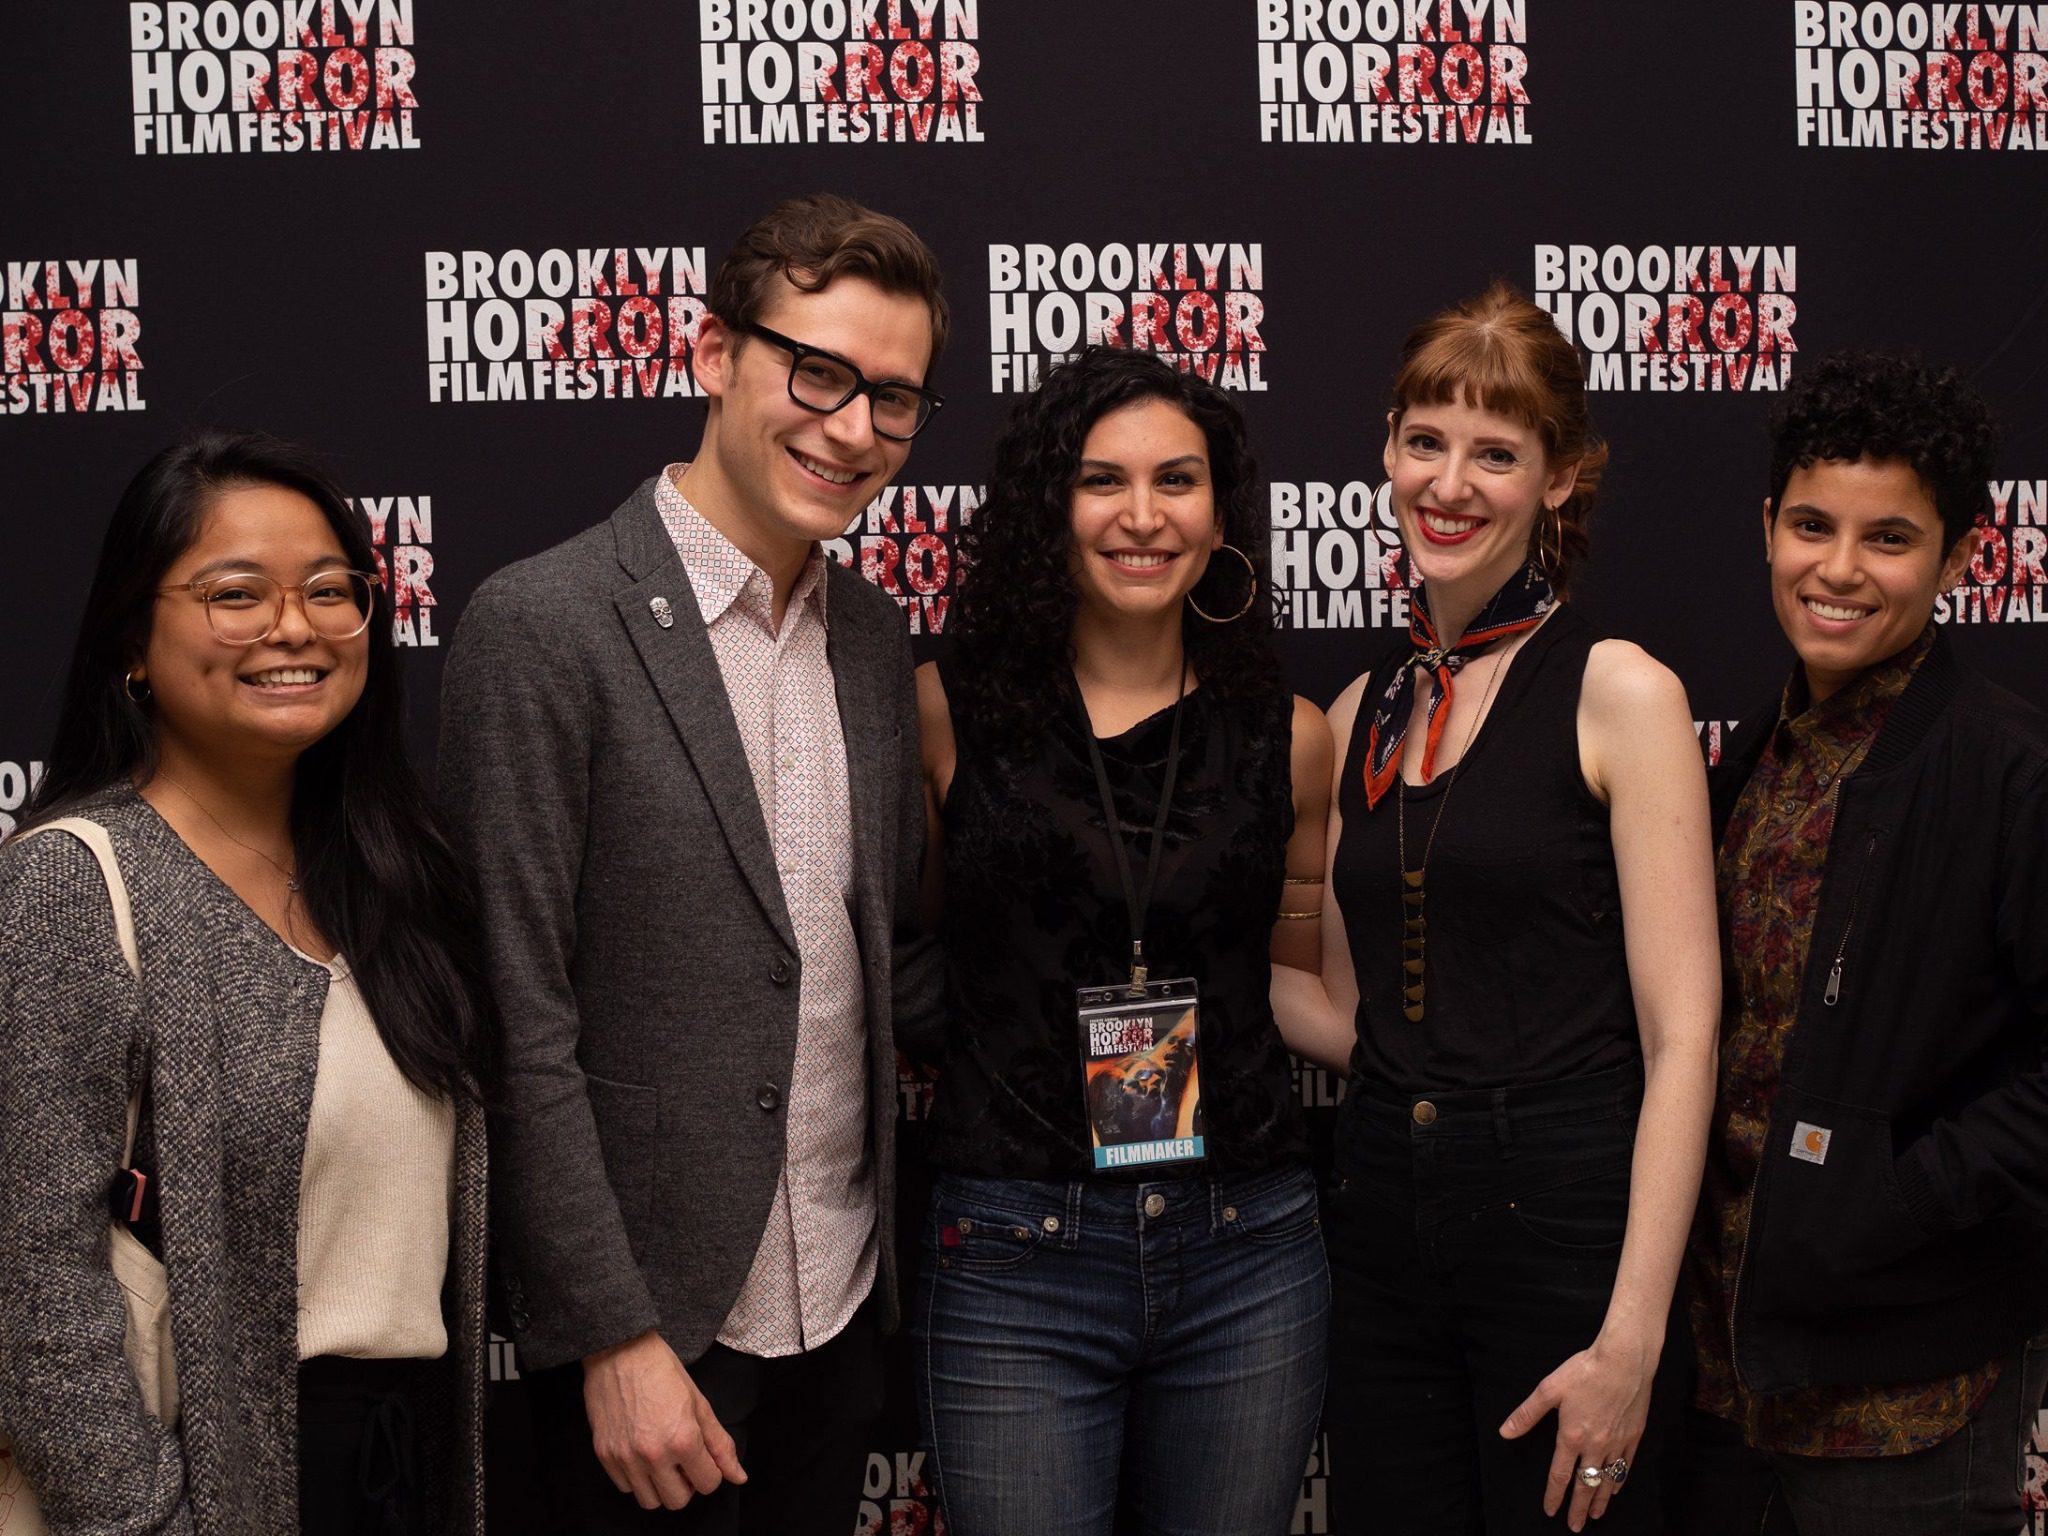 A group of Brooklyn Horror Film Festival attendees smiling and wearing festival badges